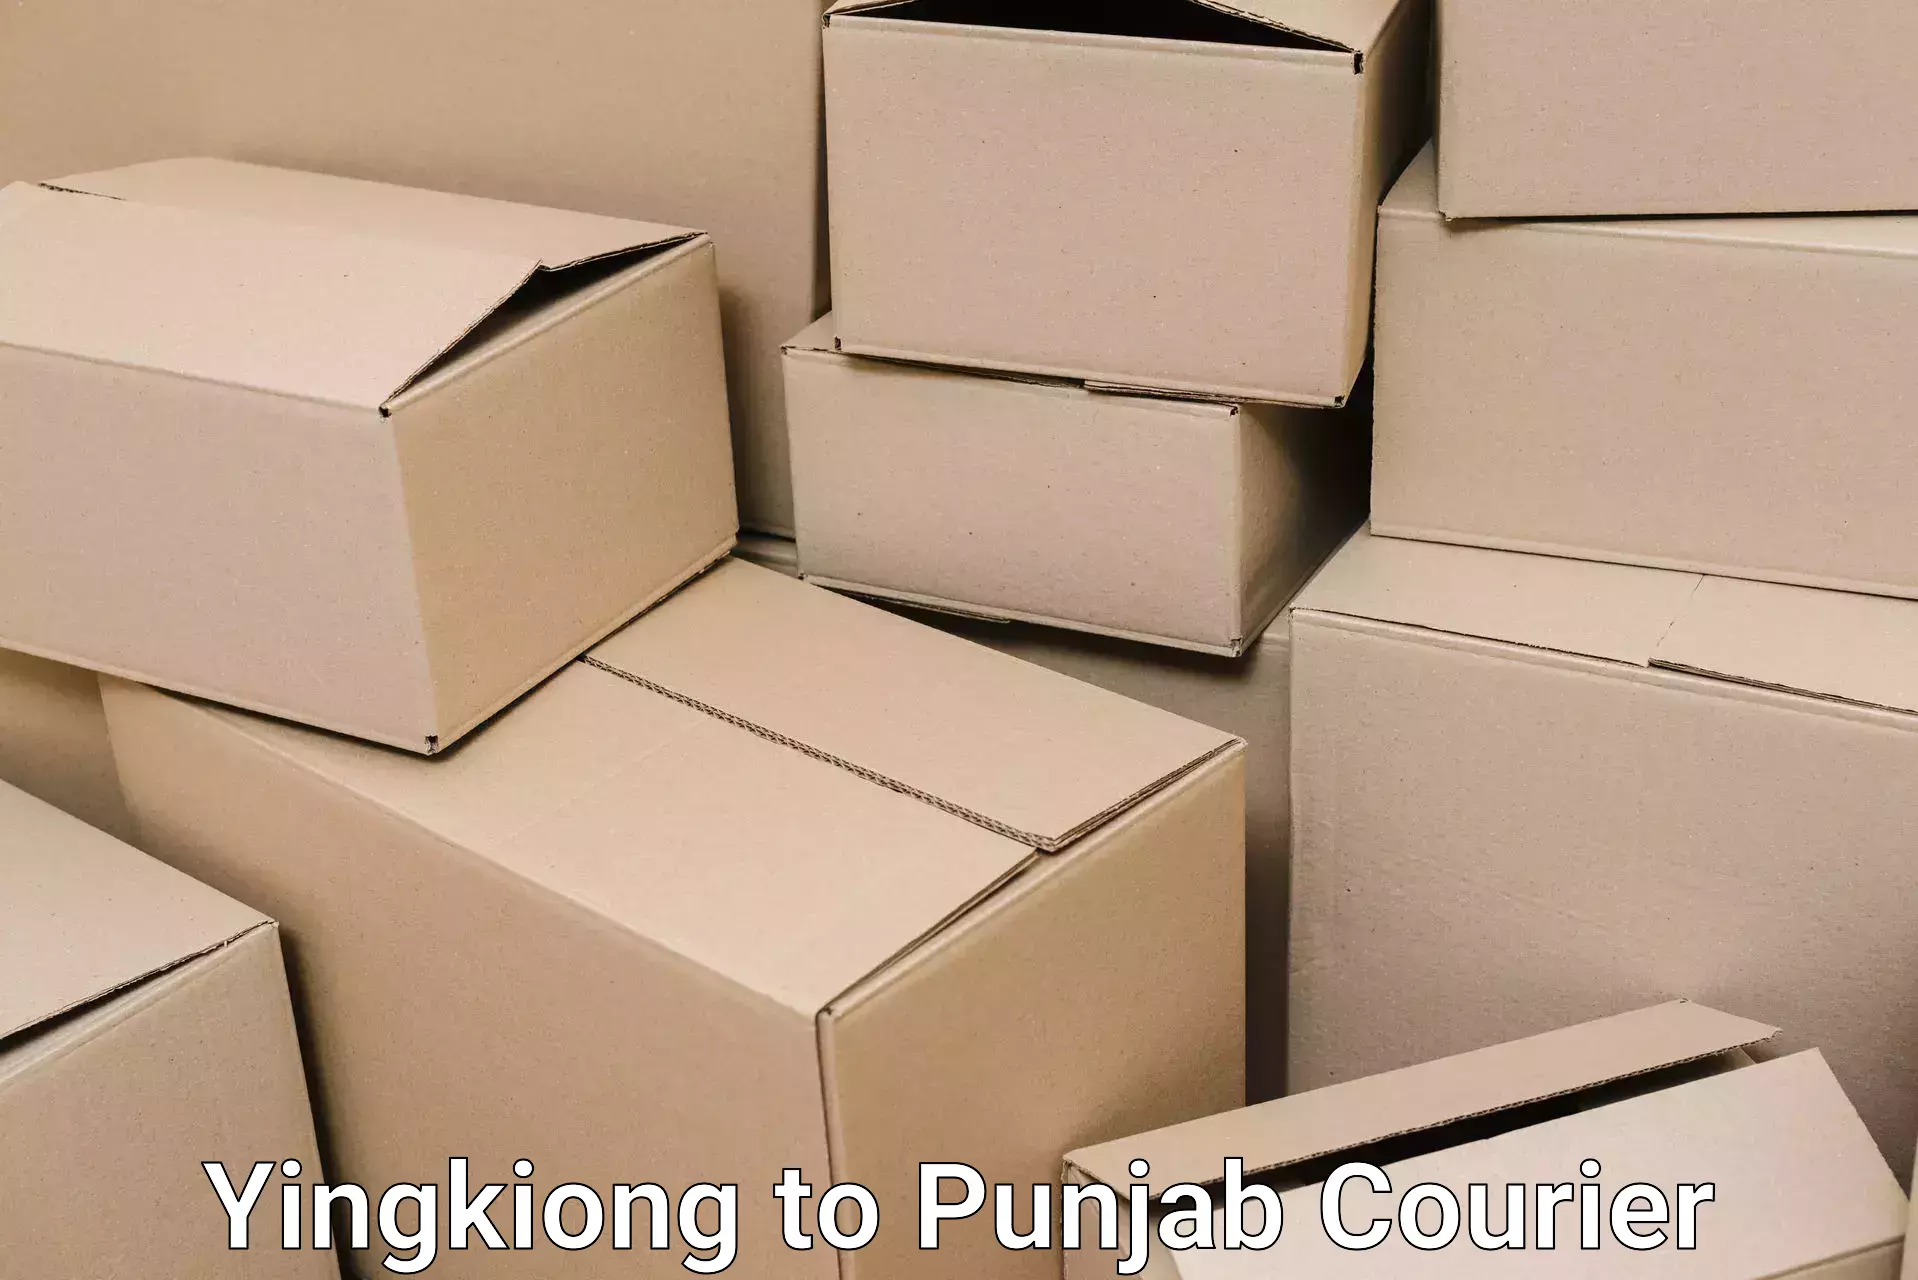 Full-service relocation Yingkiong to Punjab